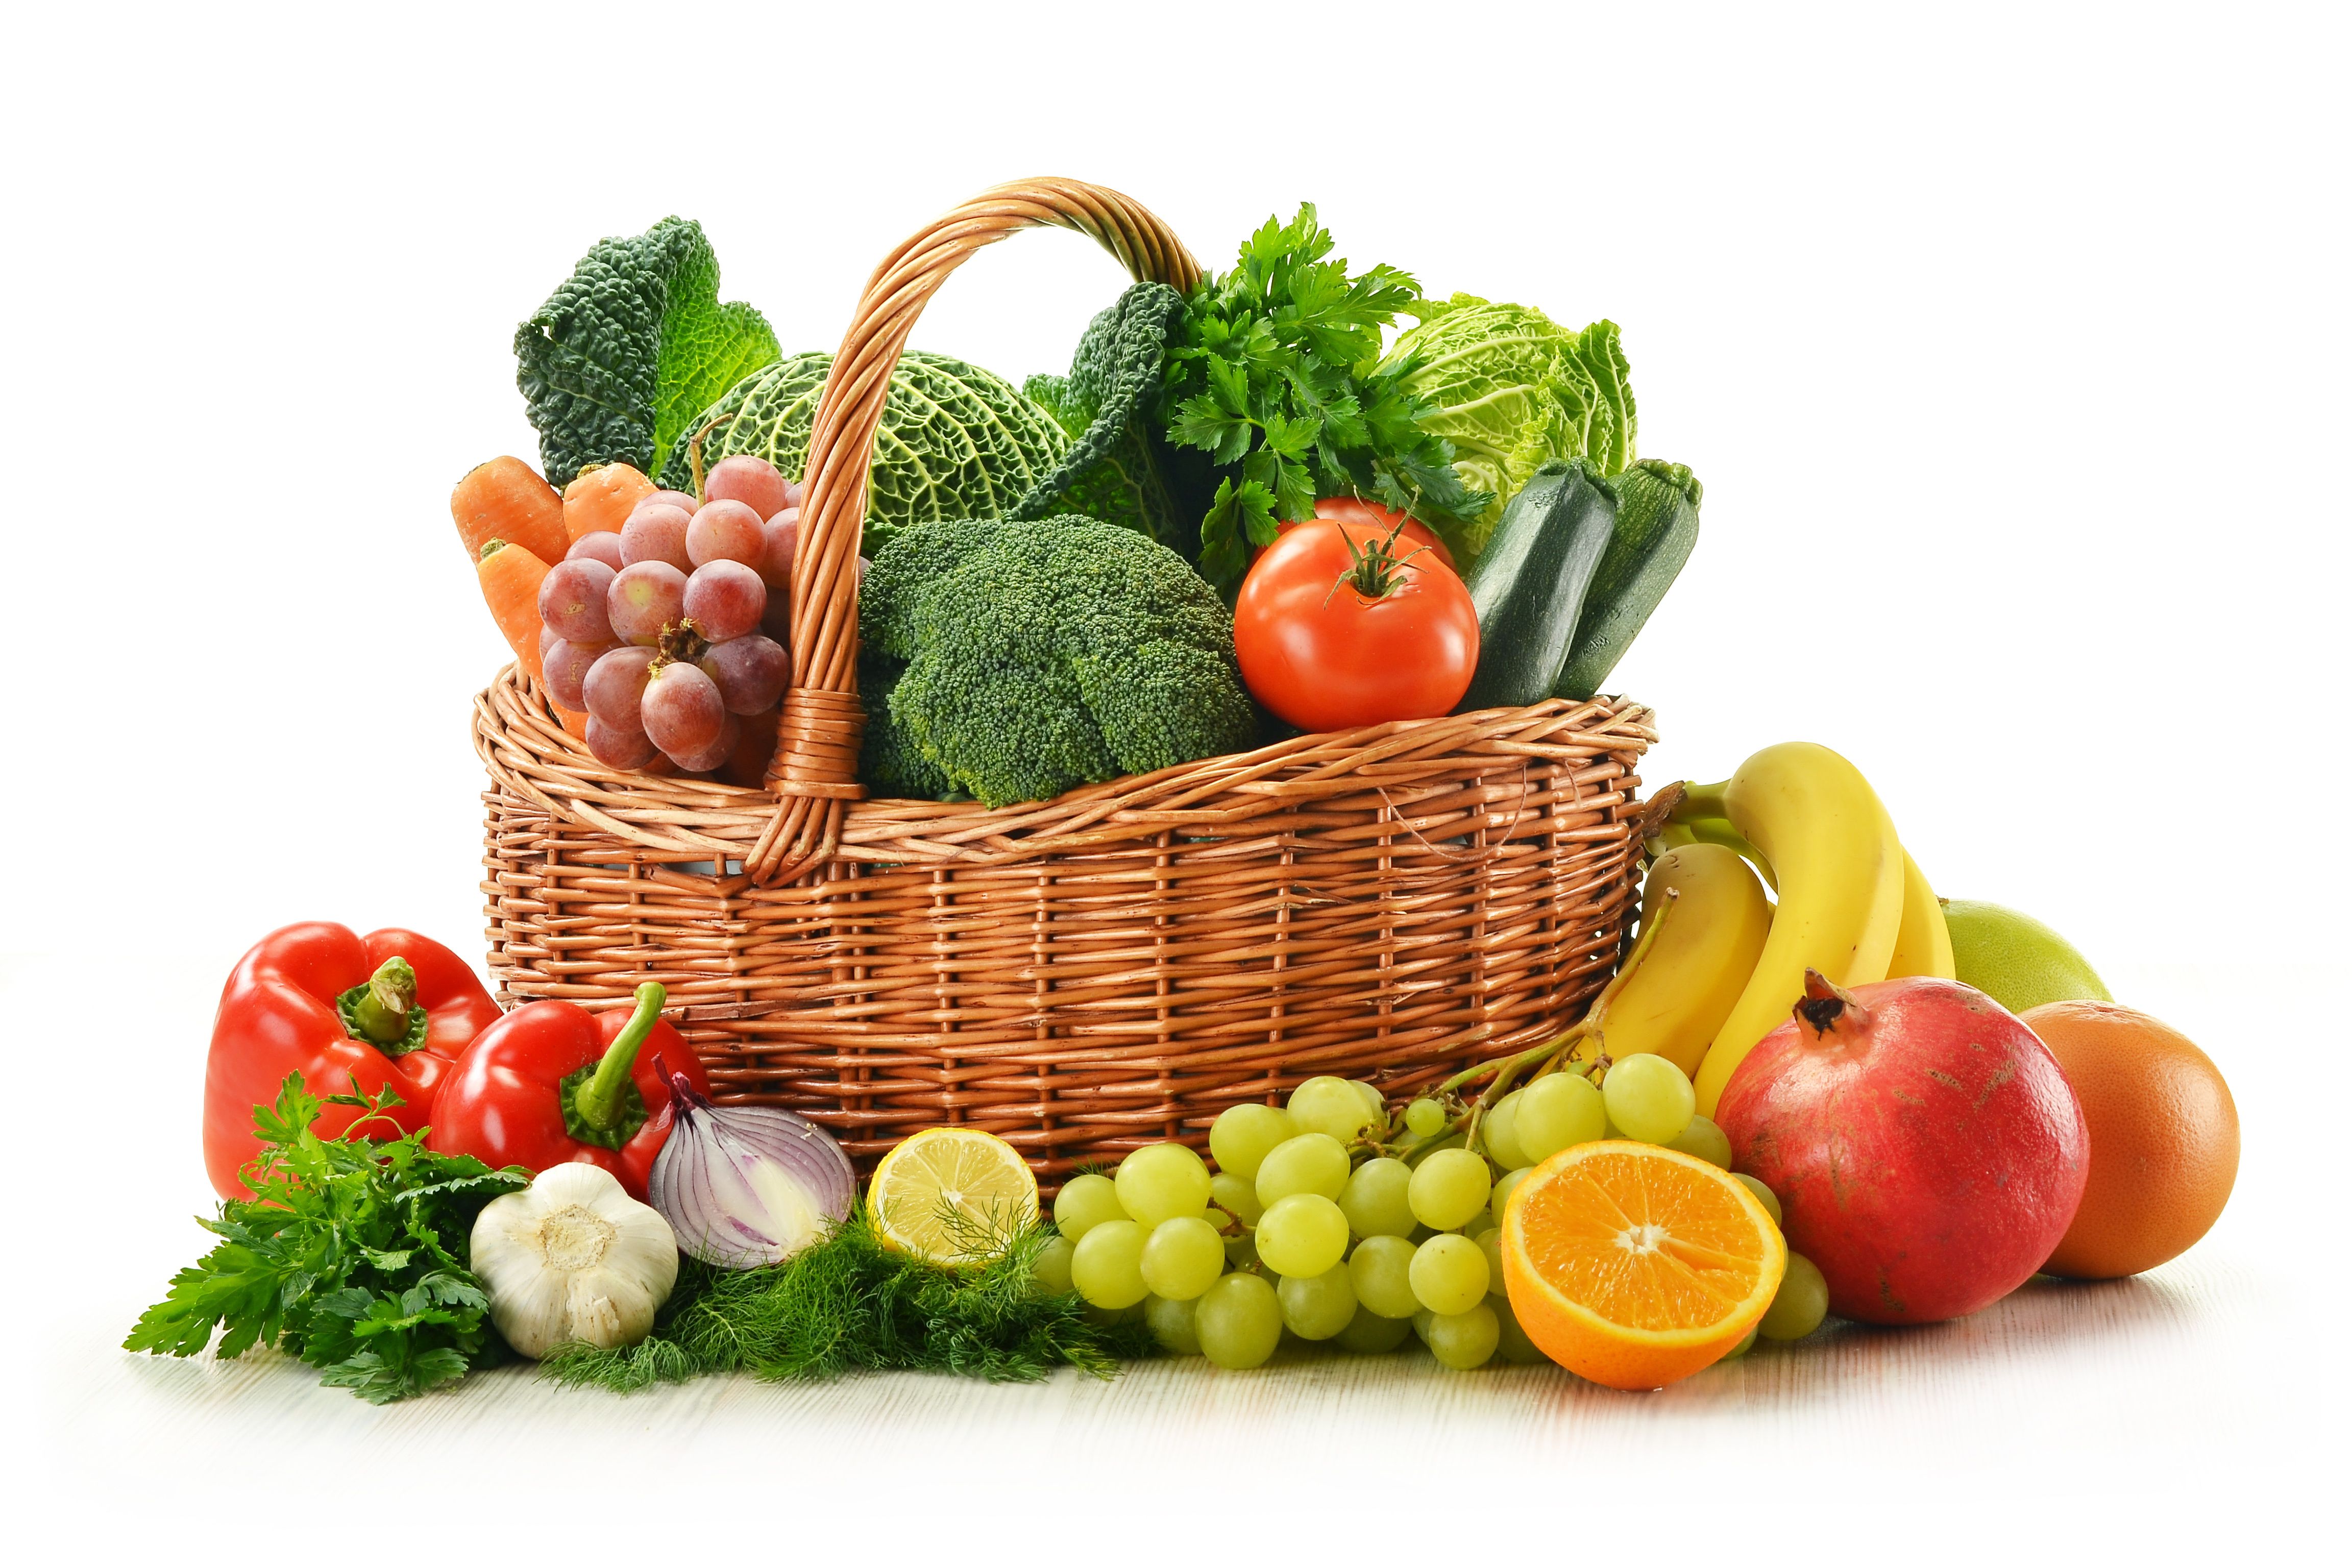 A basket filled with healthy food options, such as fresh fruits and vegetables.